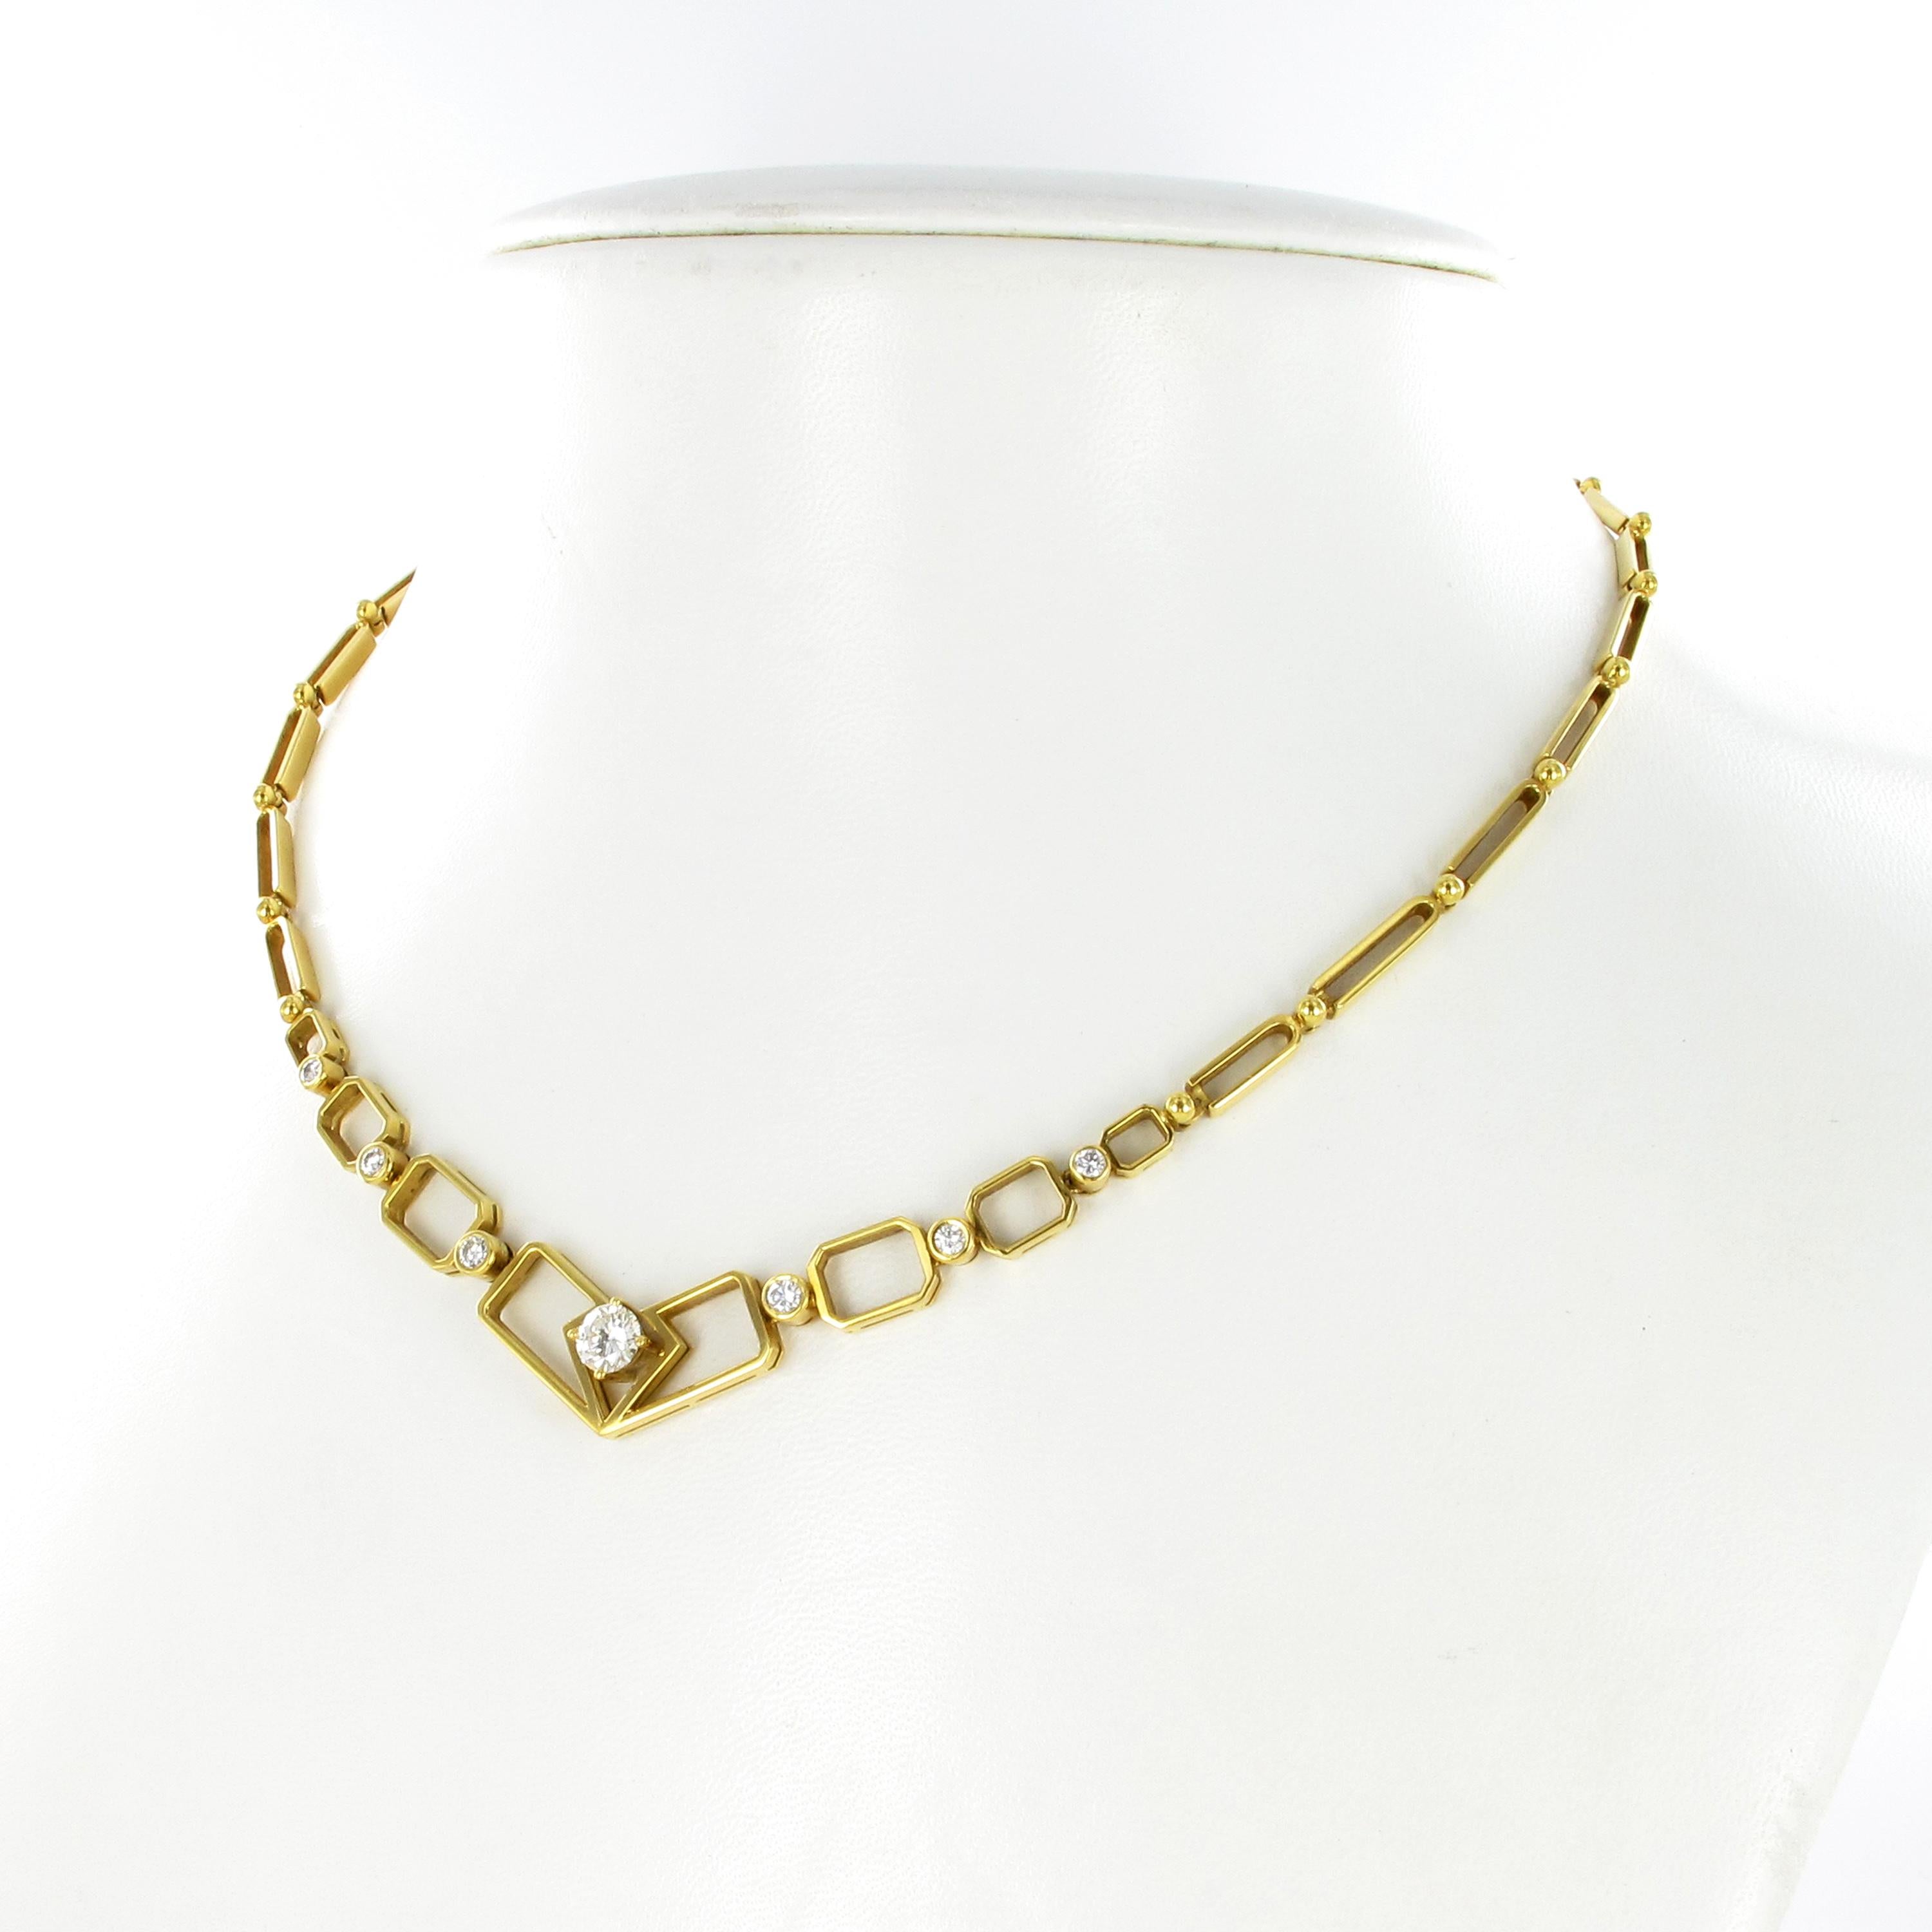 Unique necklace with an artistic touch handcrafted in 18 karat yellow gold. 

A combination of open worked, octagonal- and long clamp shaped links are connected by small gold spheres. Six links are bezel set with brilliant-cut diamonds totalling